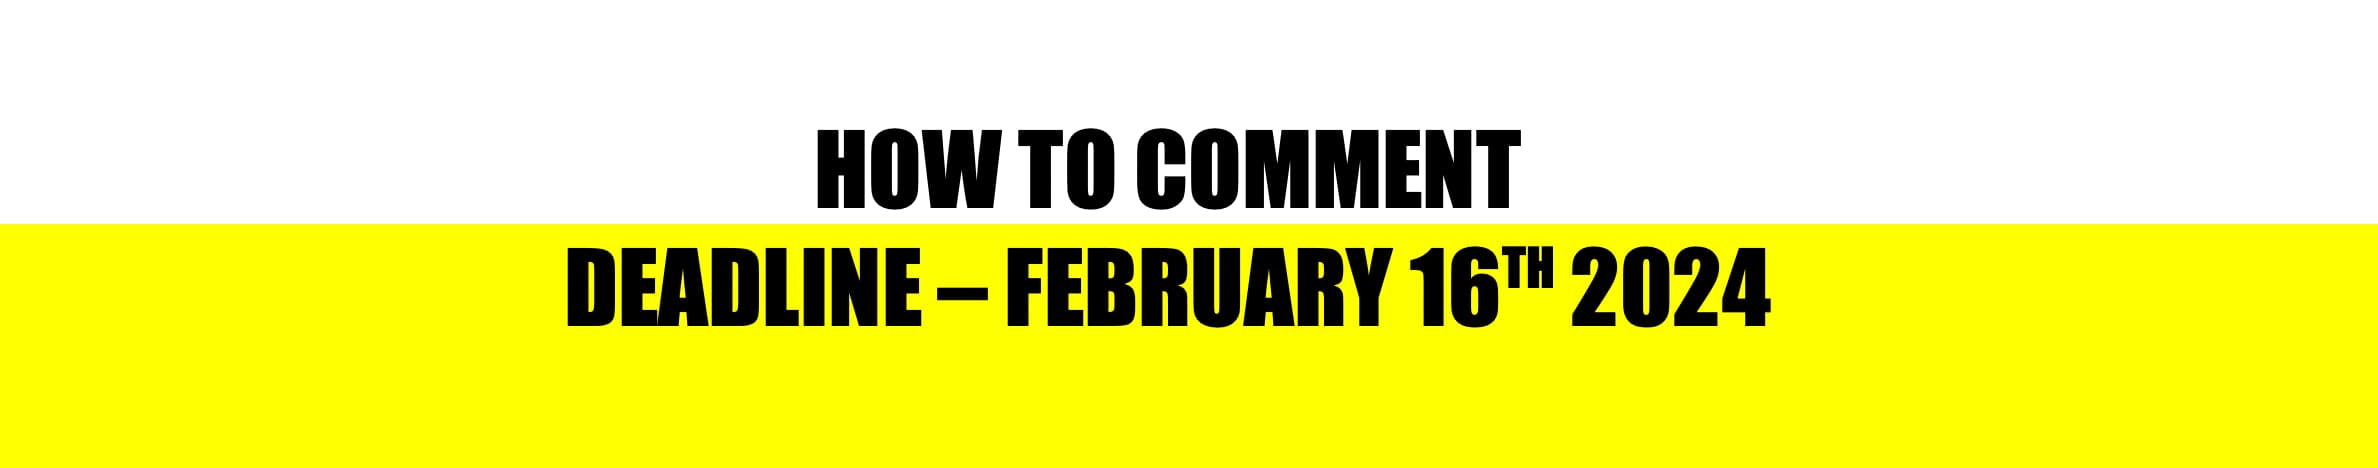 HOW TO COMMENT - DEADLINE FEBRUARY 16TH 2024